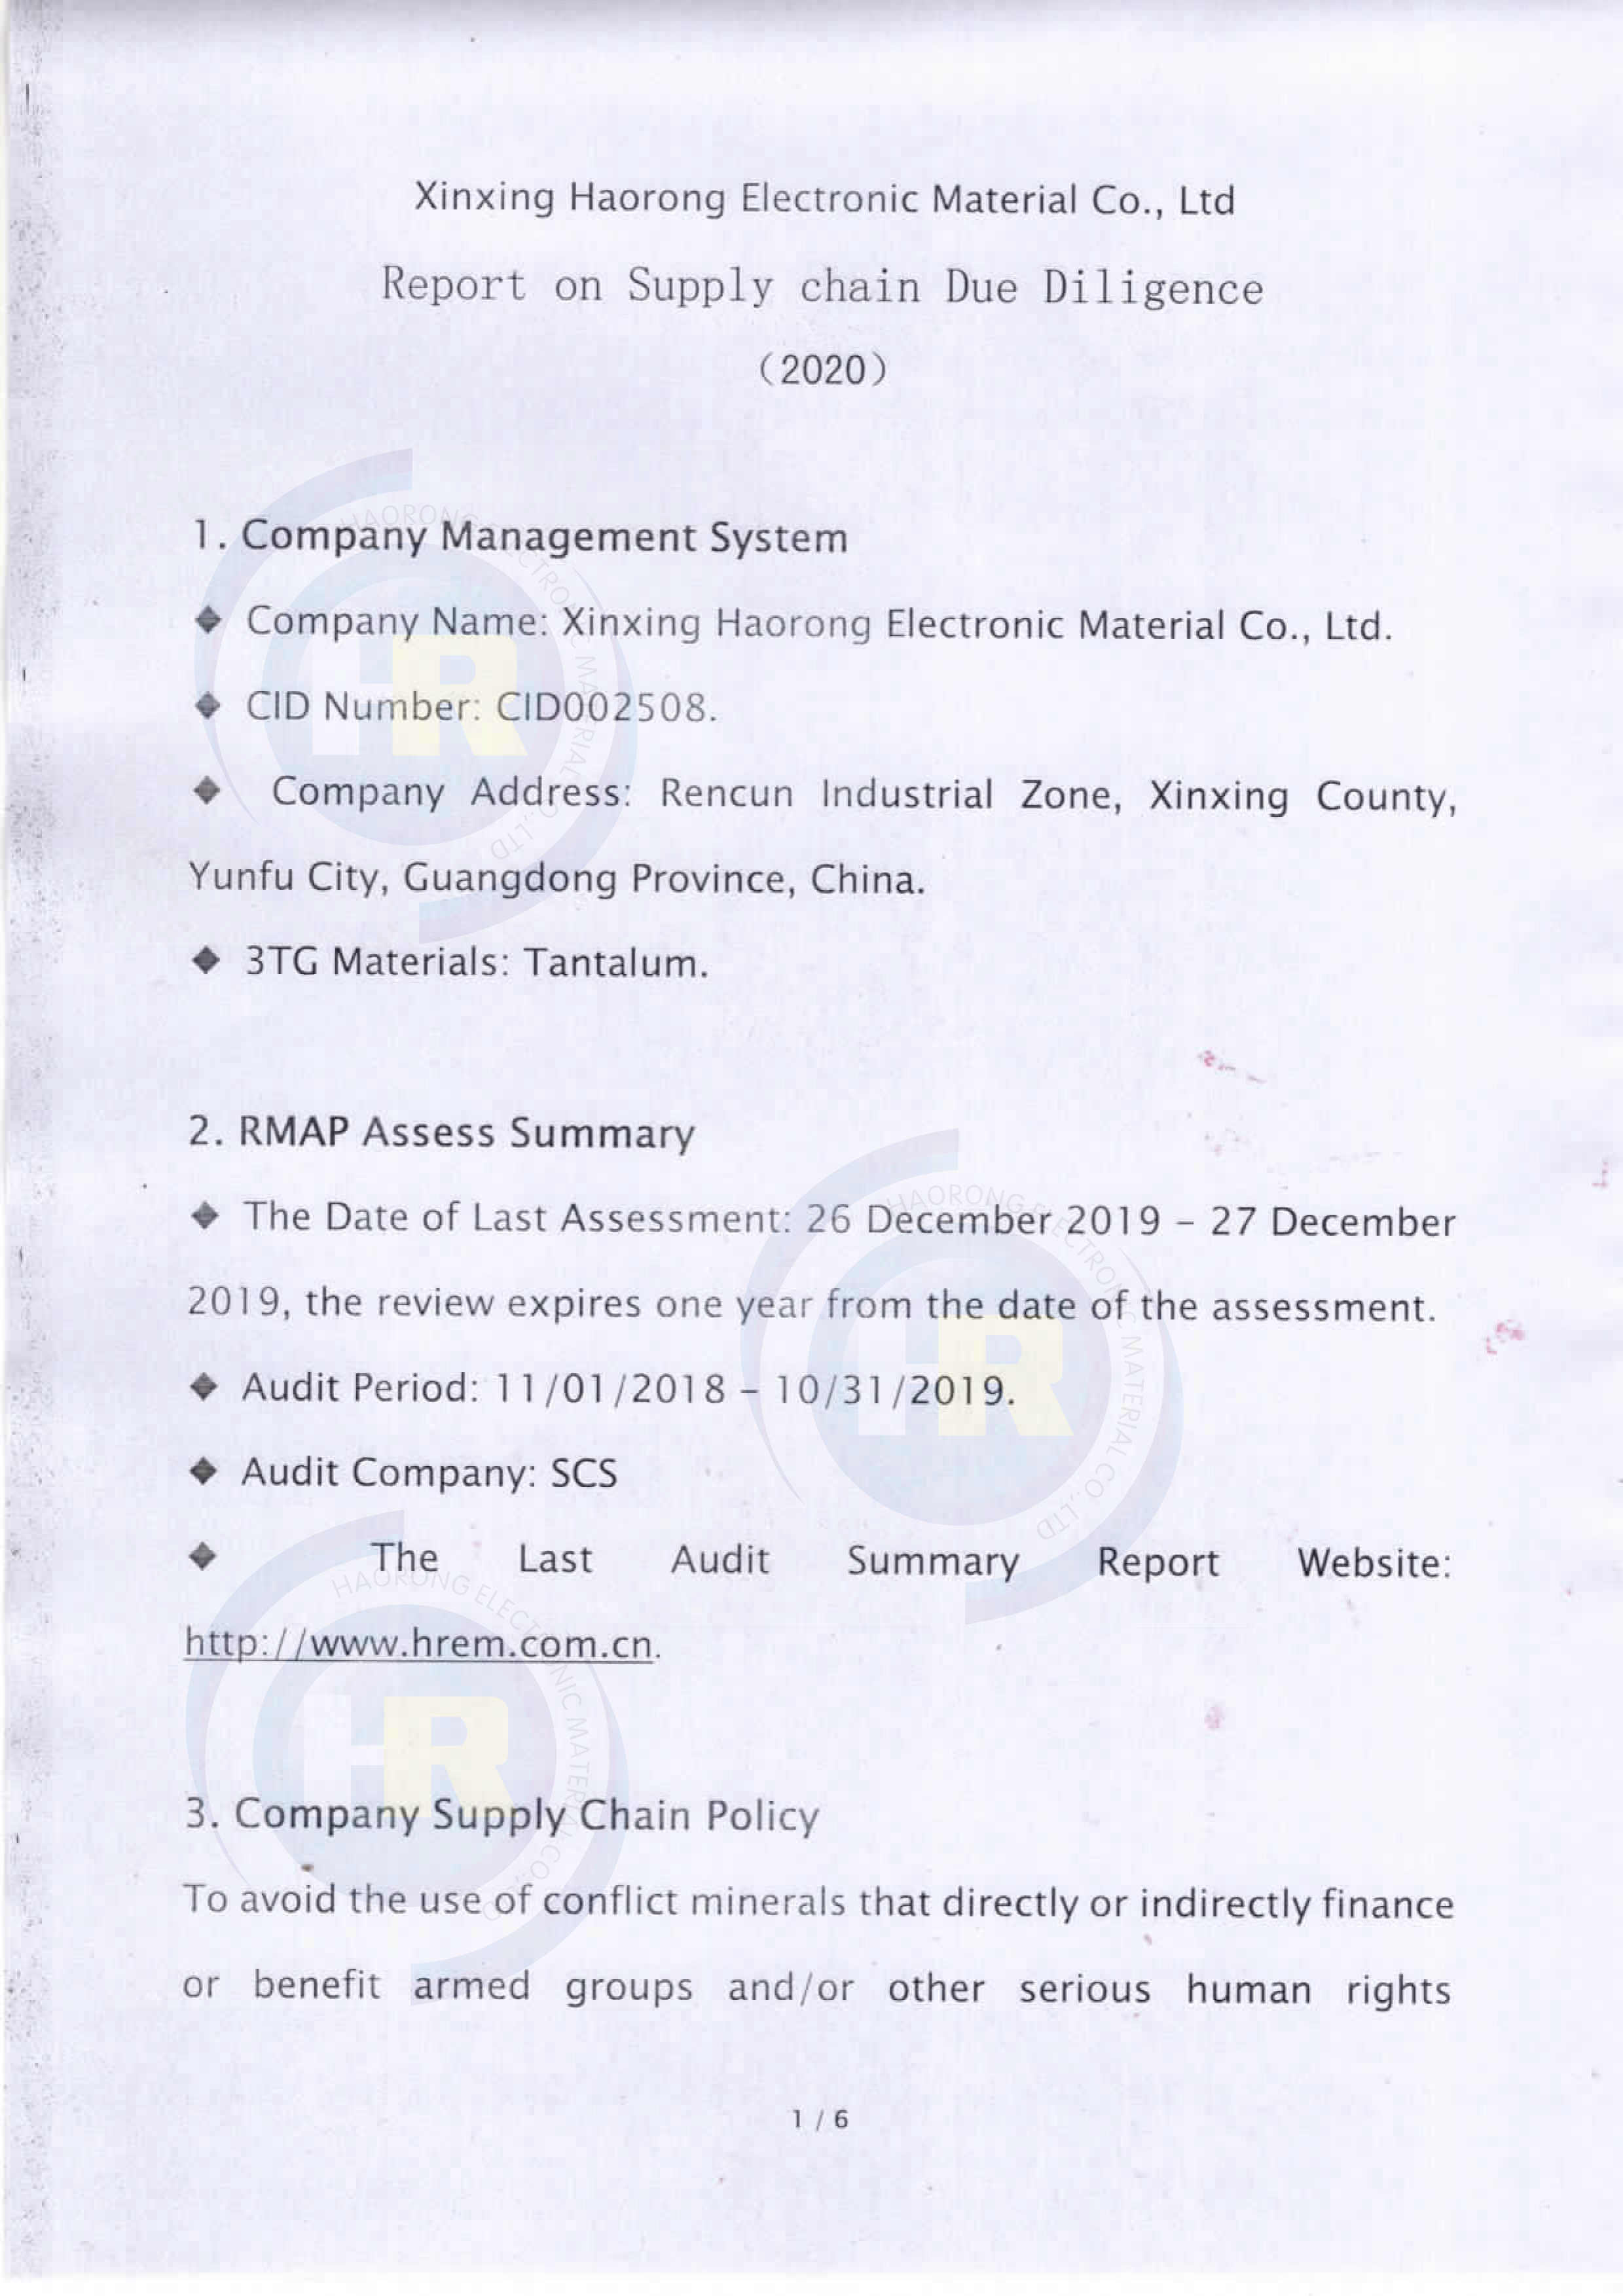 Report on  Supply Chain Due Diligence-Xinxing Haorong-2020 - updated